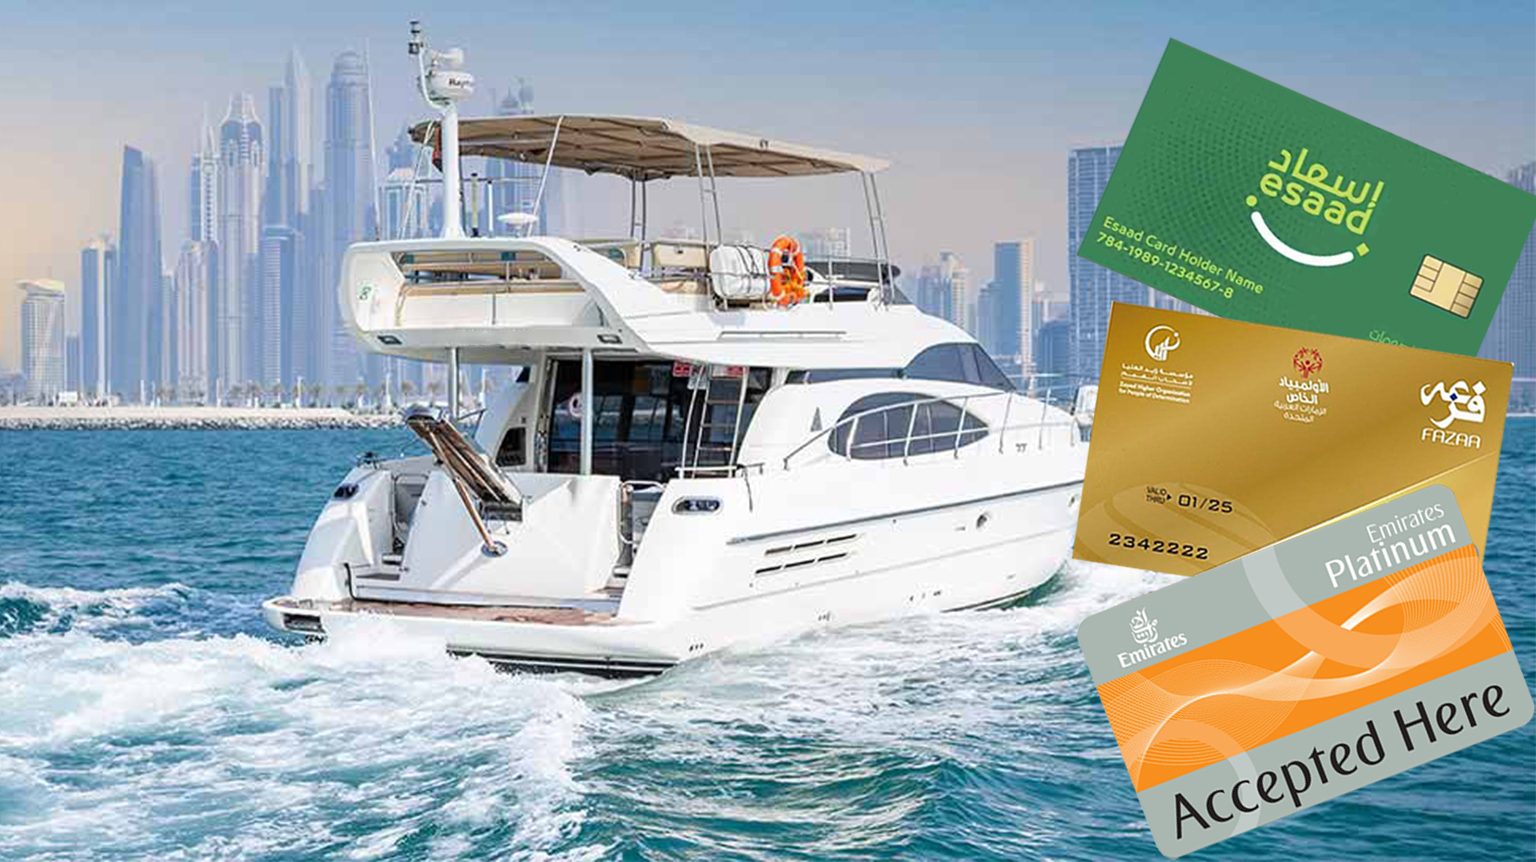 Cruise Deals Available for Luxury Yacht Tours in Dubai